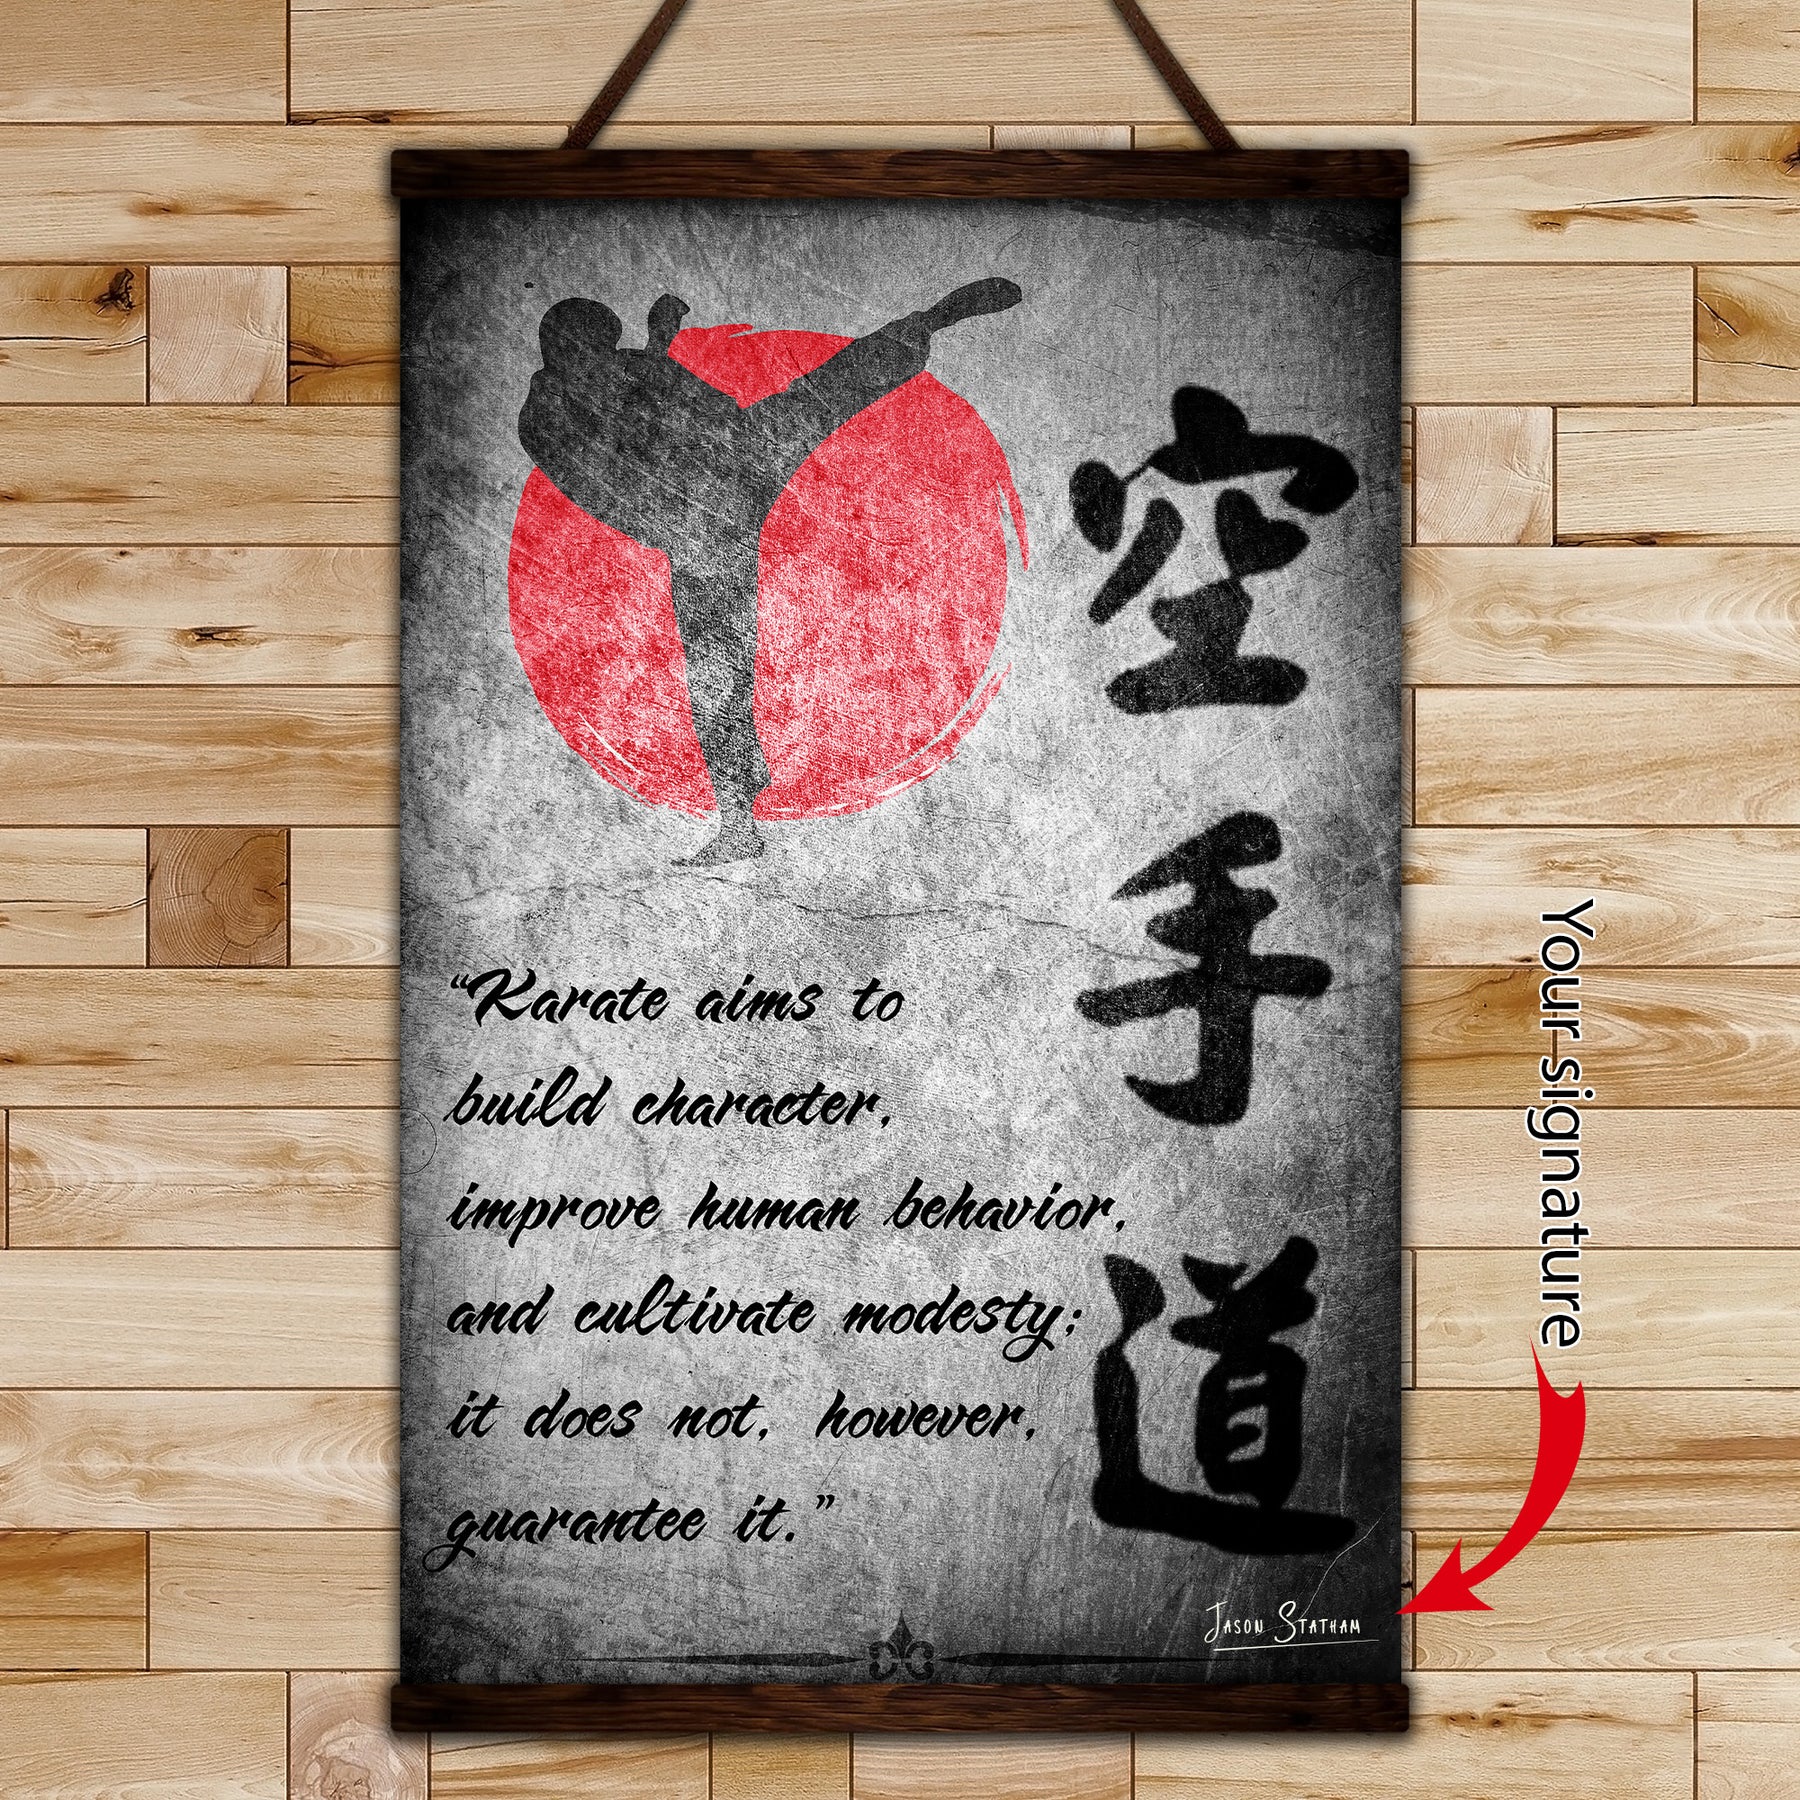 KA020 - Karate Aims To Build Character, Improve Human Behavior, And Cultivate Modesty; It Does Not, However, Guarantee It - Yasuhiro Konishi - Vertical Poster - Vertical Canvas - Karate Poster